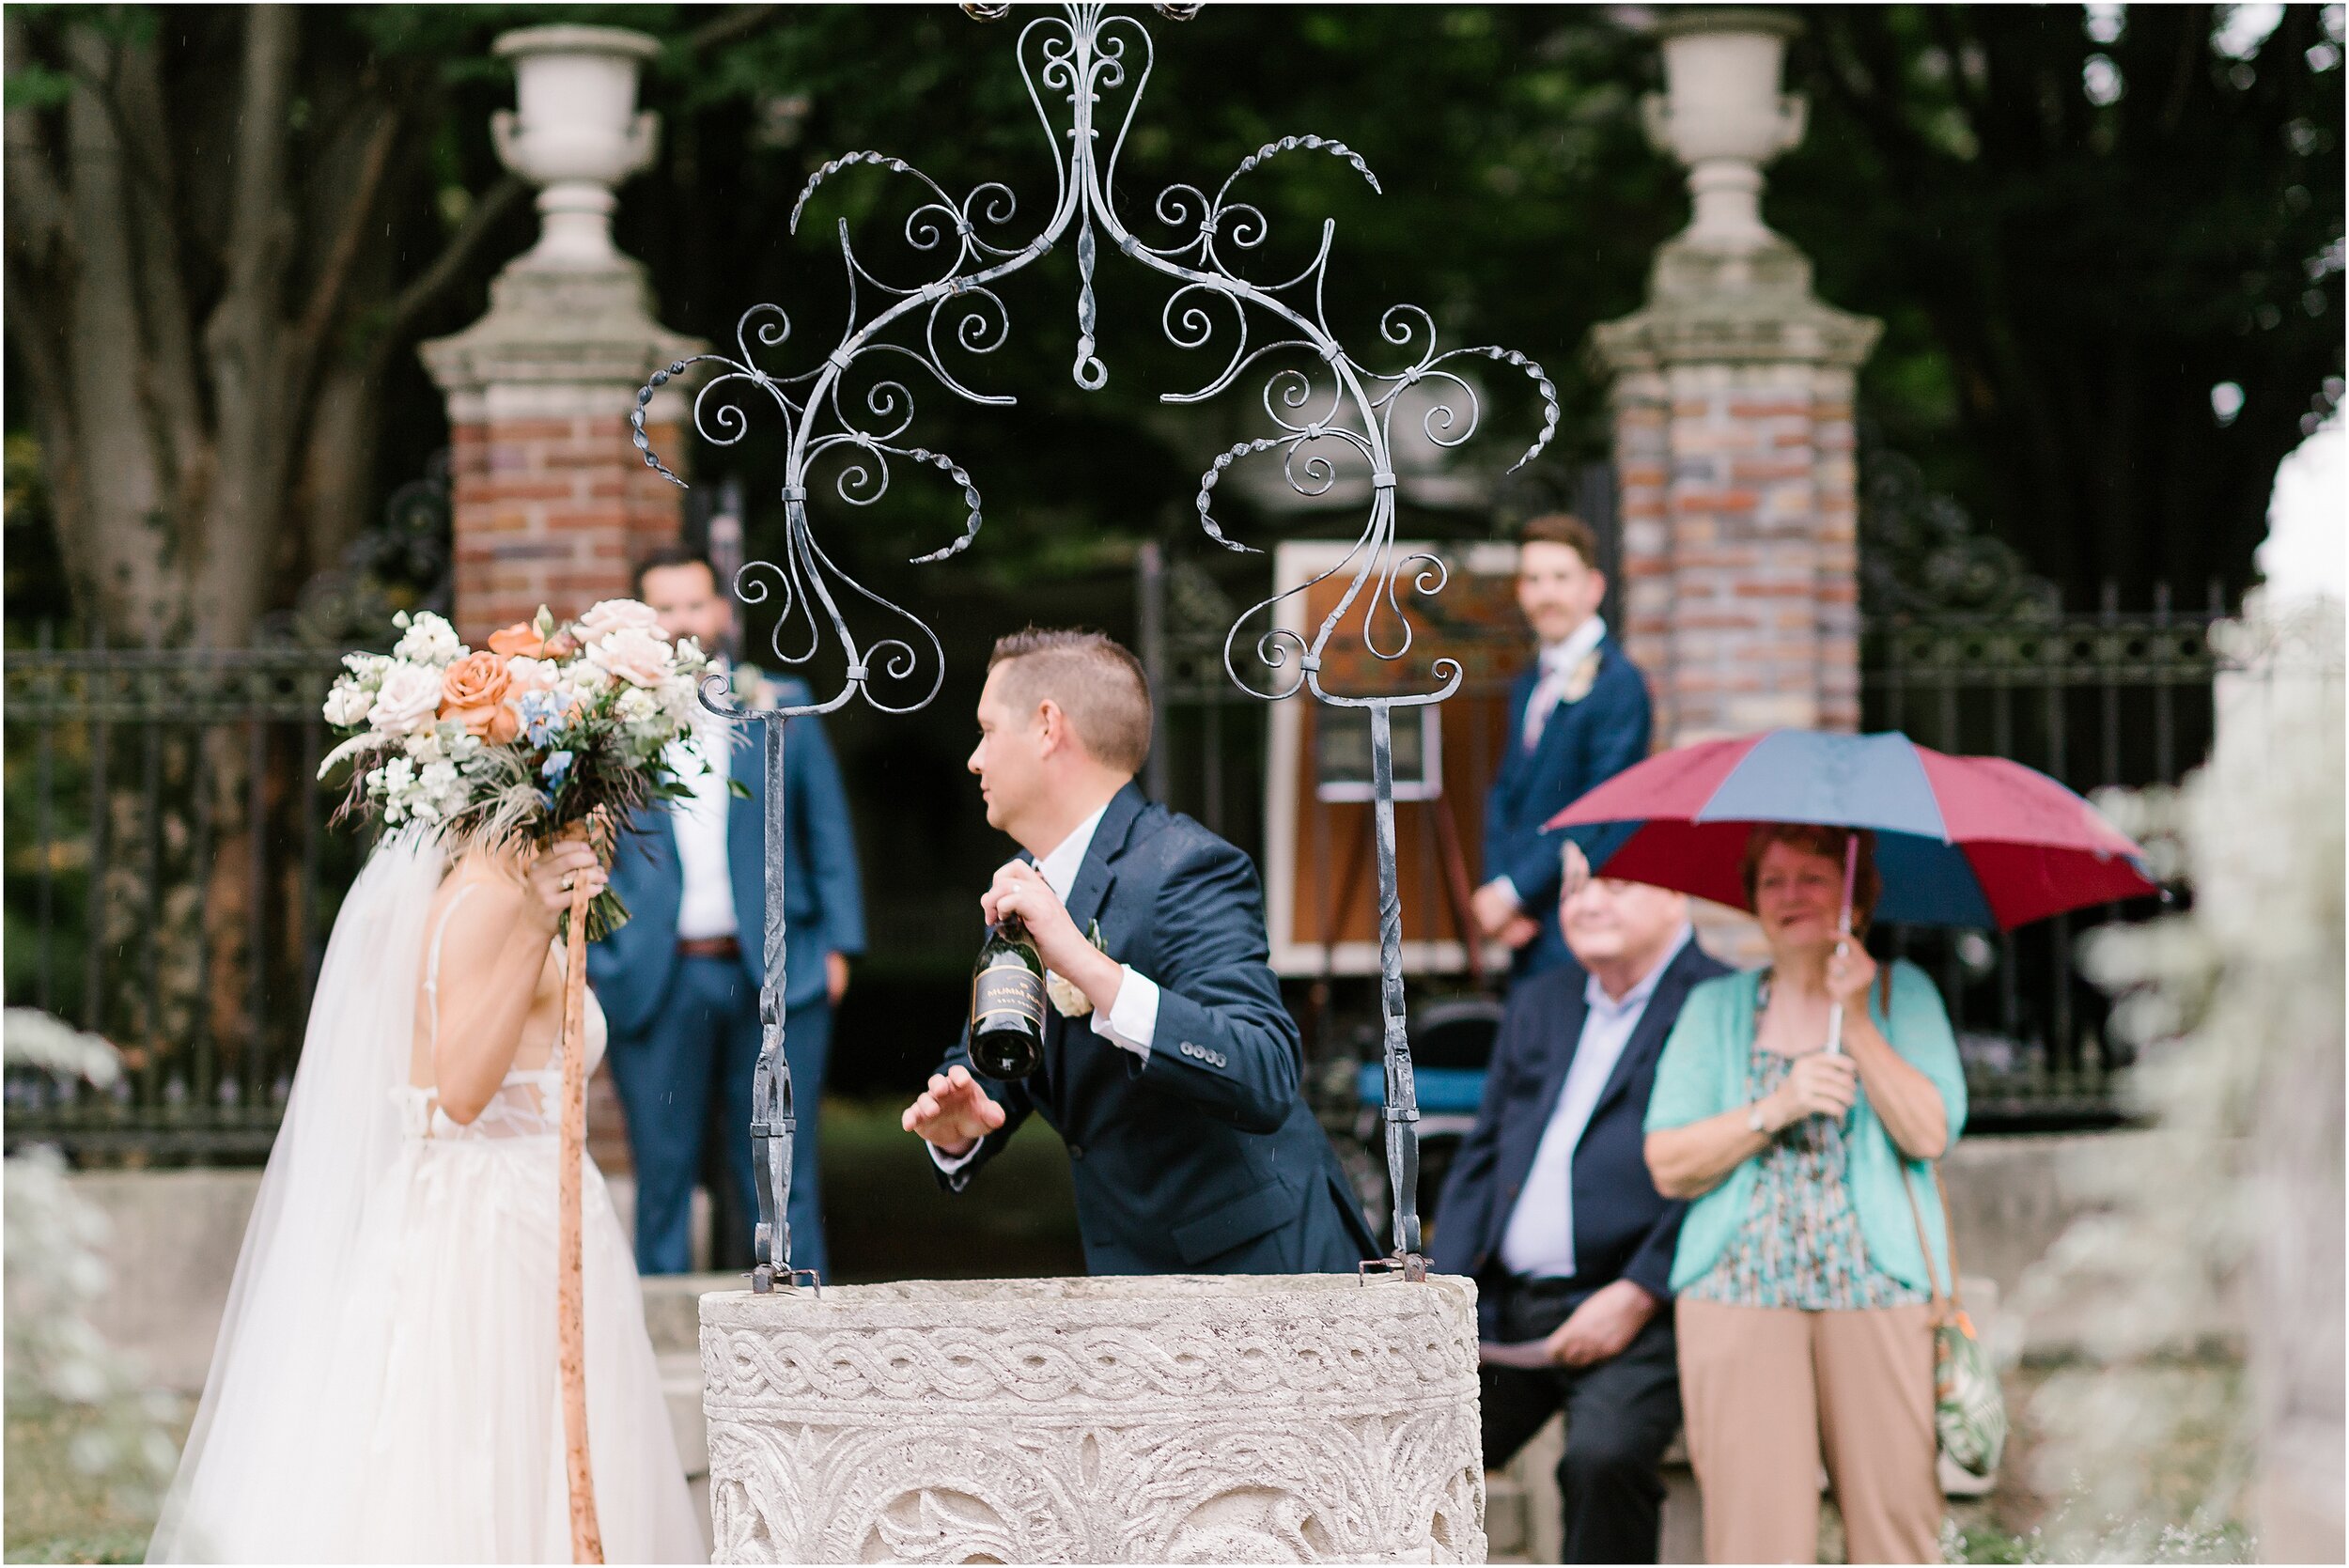 Rebecca Shehorn Photography Colleen and Kyle Inn at Irwin Gardens Wedding-576_The Commons Columbus Inn at Irwin Garden Indianapolis Wedding Photographer.jpg